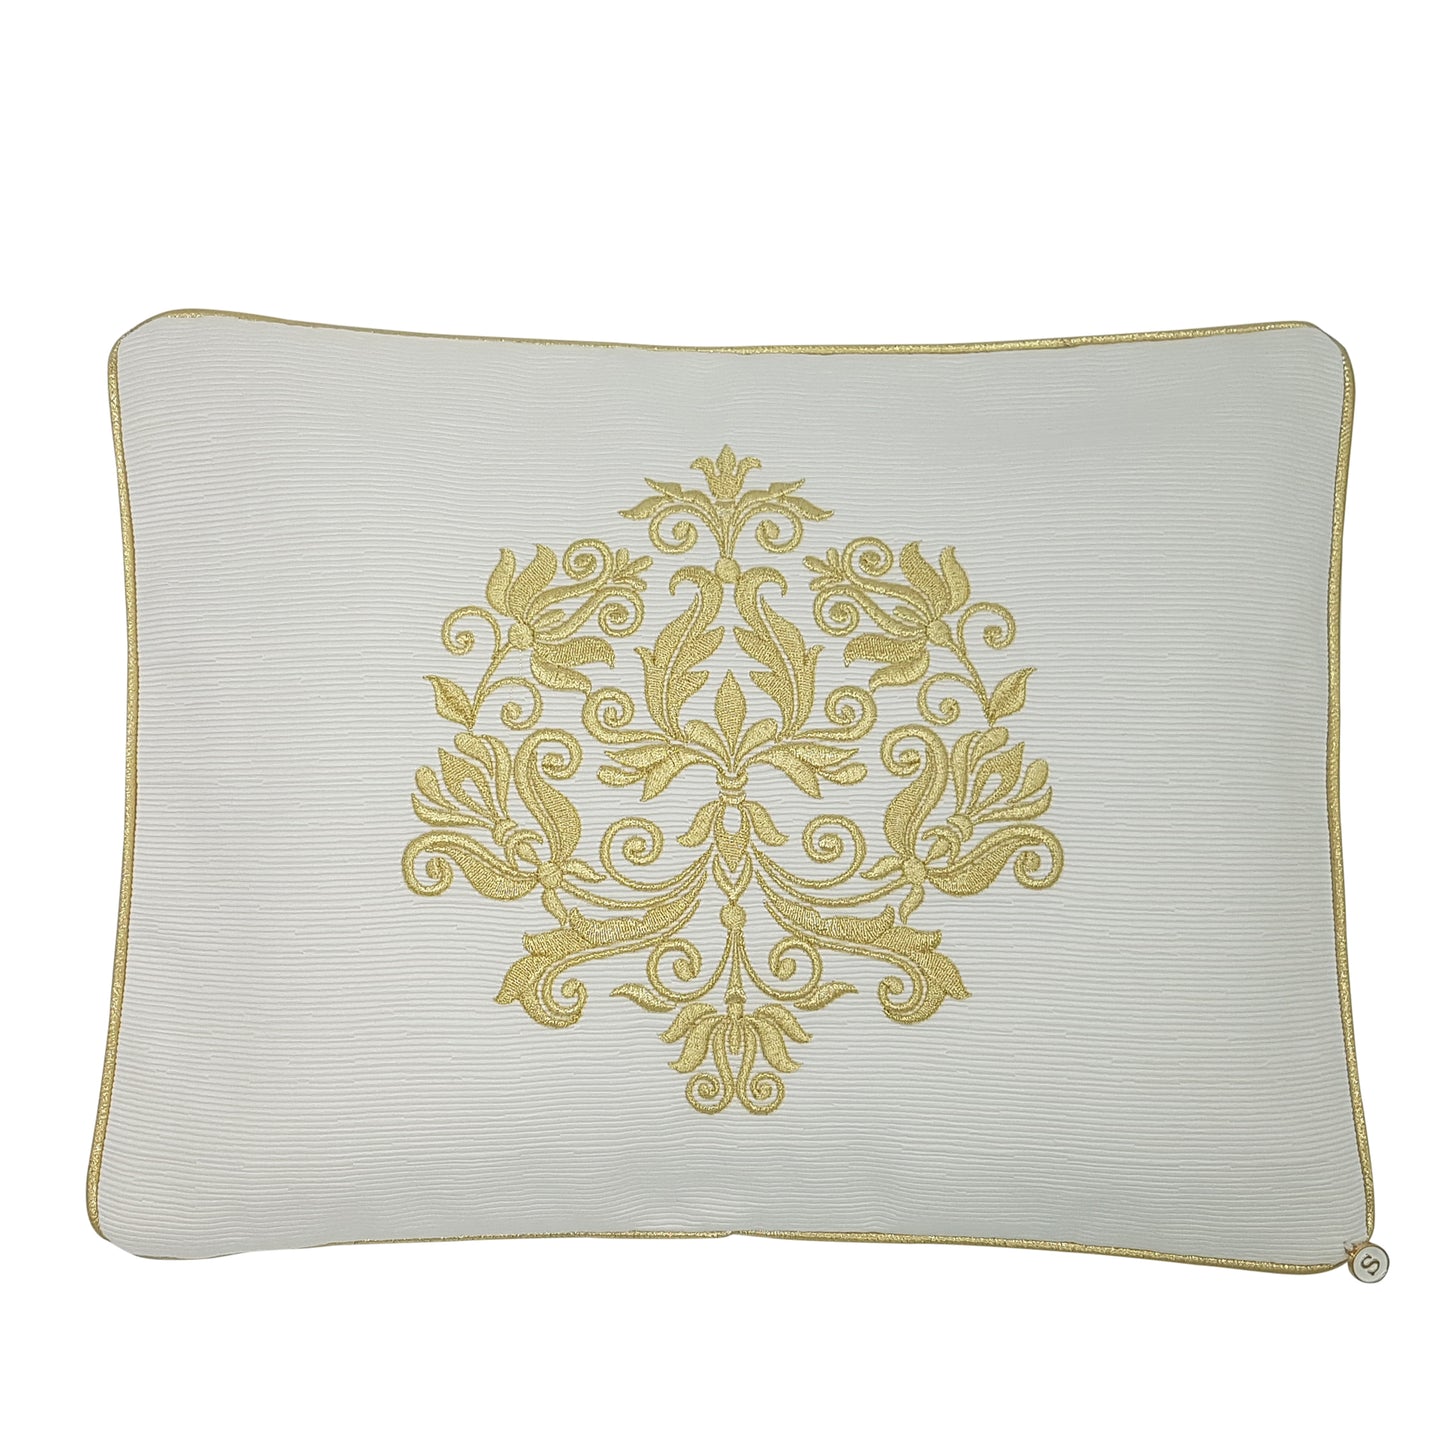 'GOLD BOTANICALS' Embroidered Pillowcase